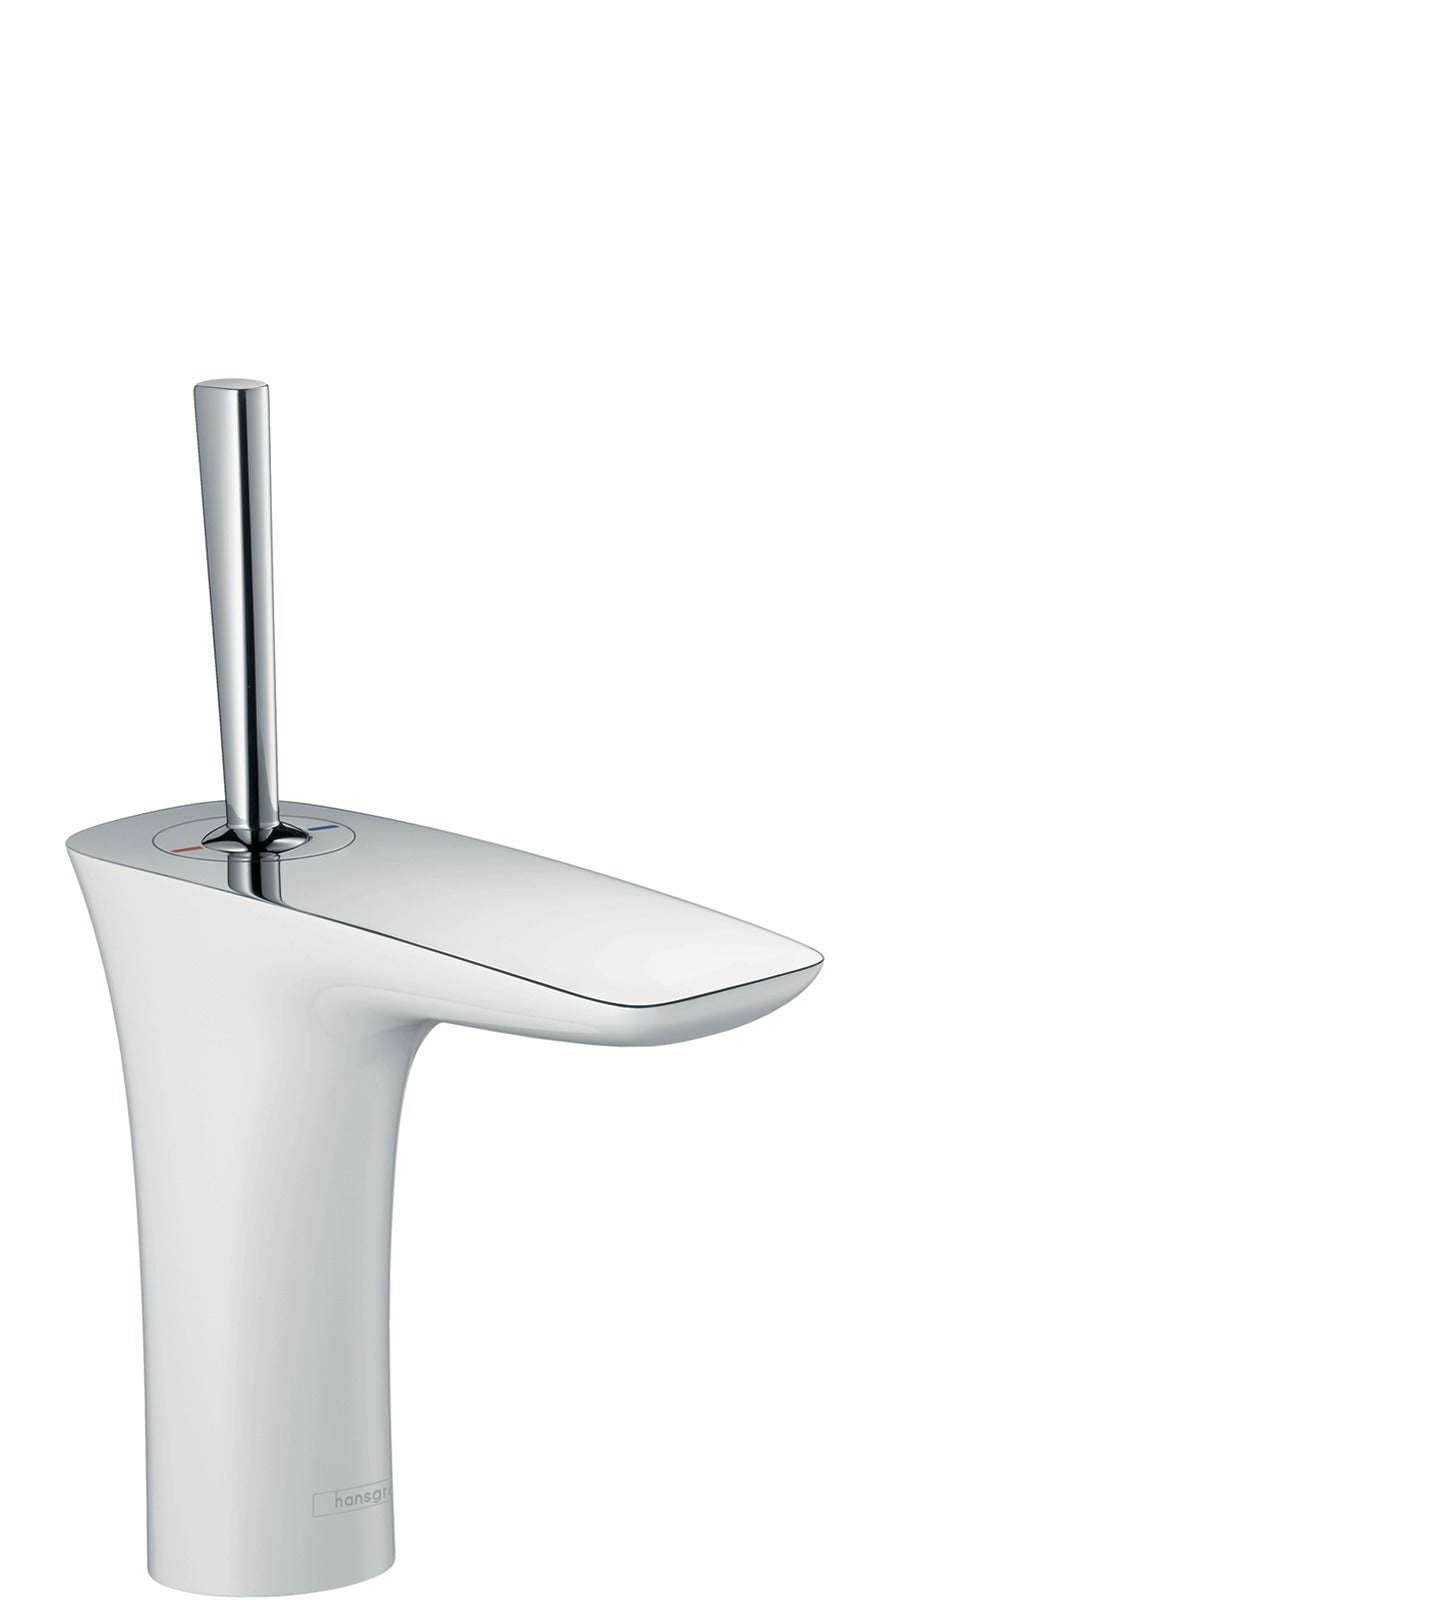 HANSGROHE 15074401 PuraVida Single-Hole Faucet 110 with Pop-Up Drain, 1.2 GPM in White/Chrome